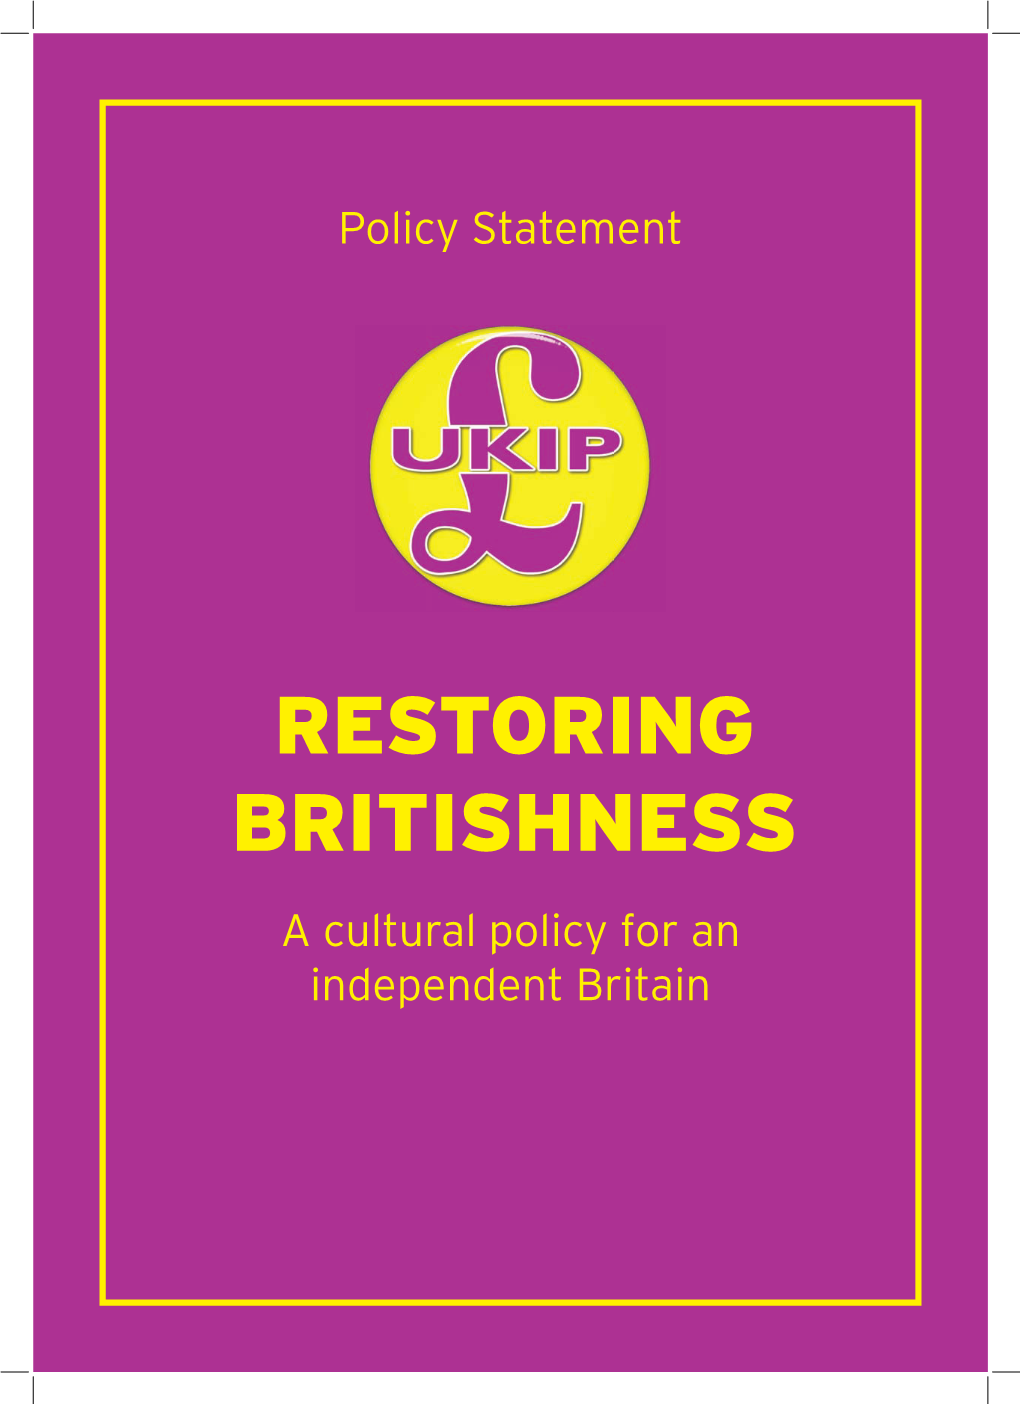 RESTORING BRITISHNESS a Cultural Policy for an Independent Britain RESTORING BRITISHNESS